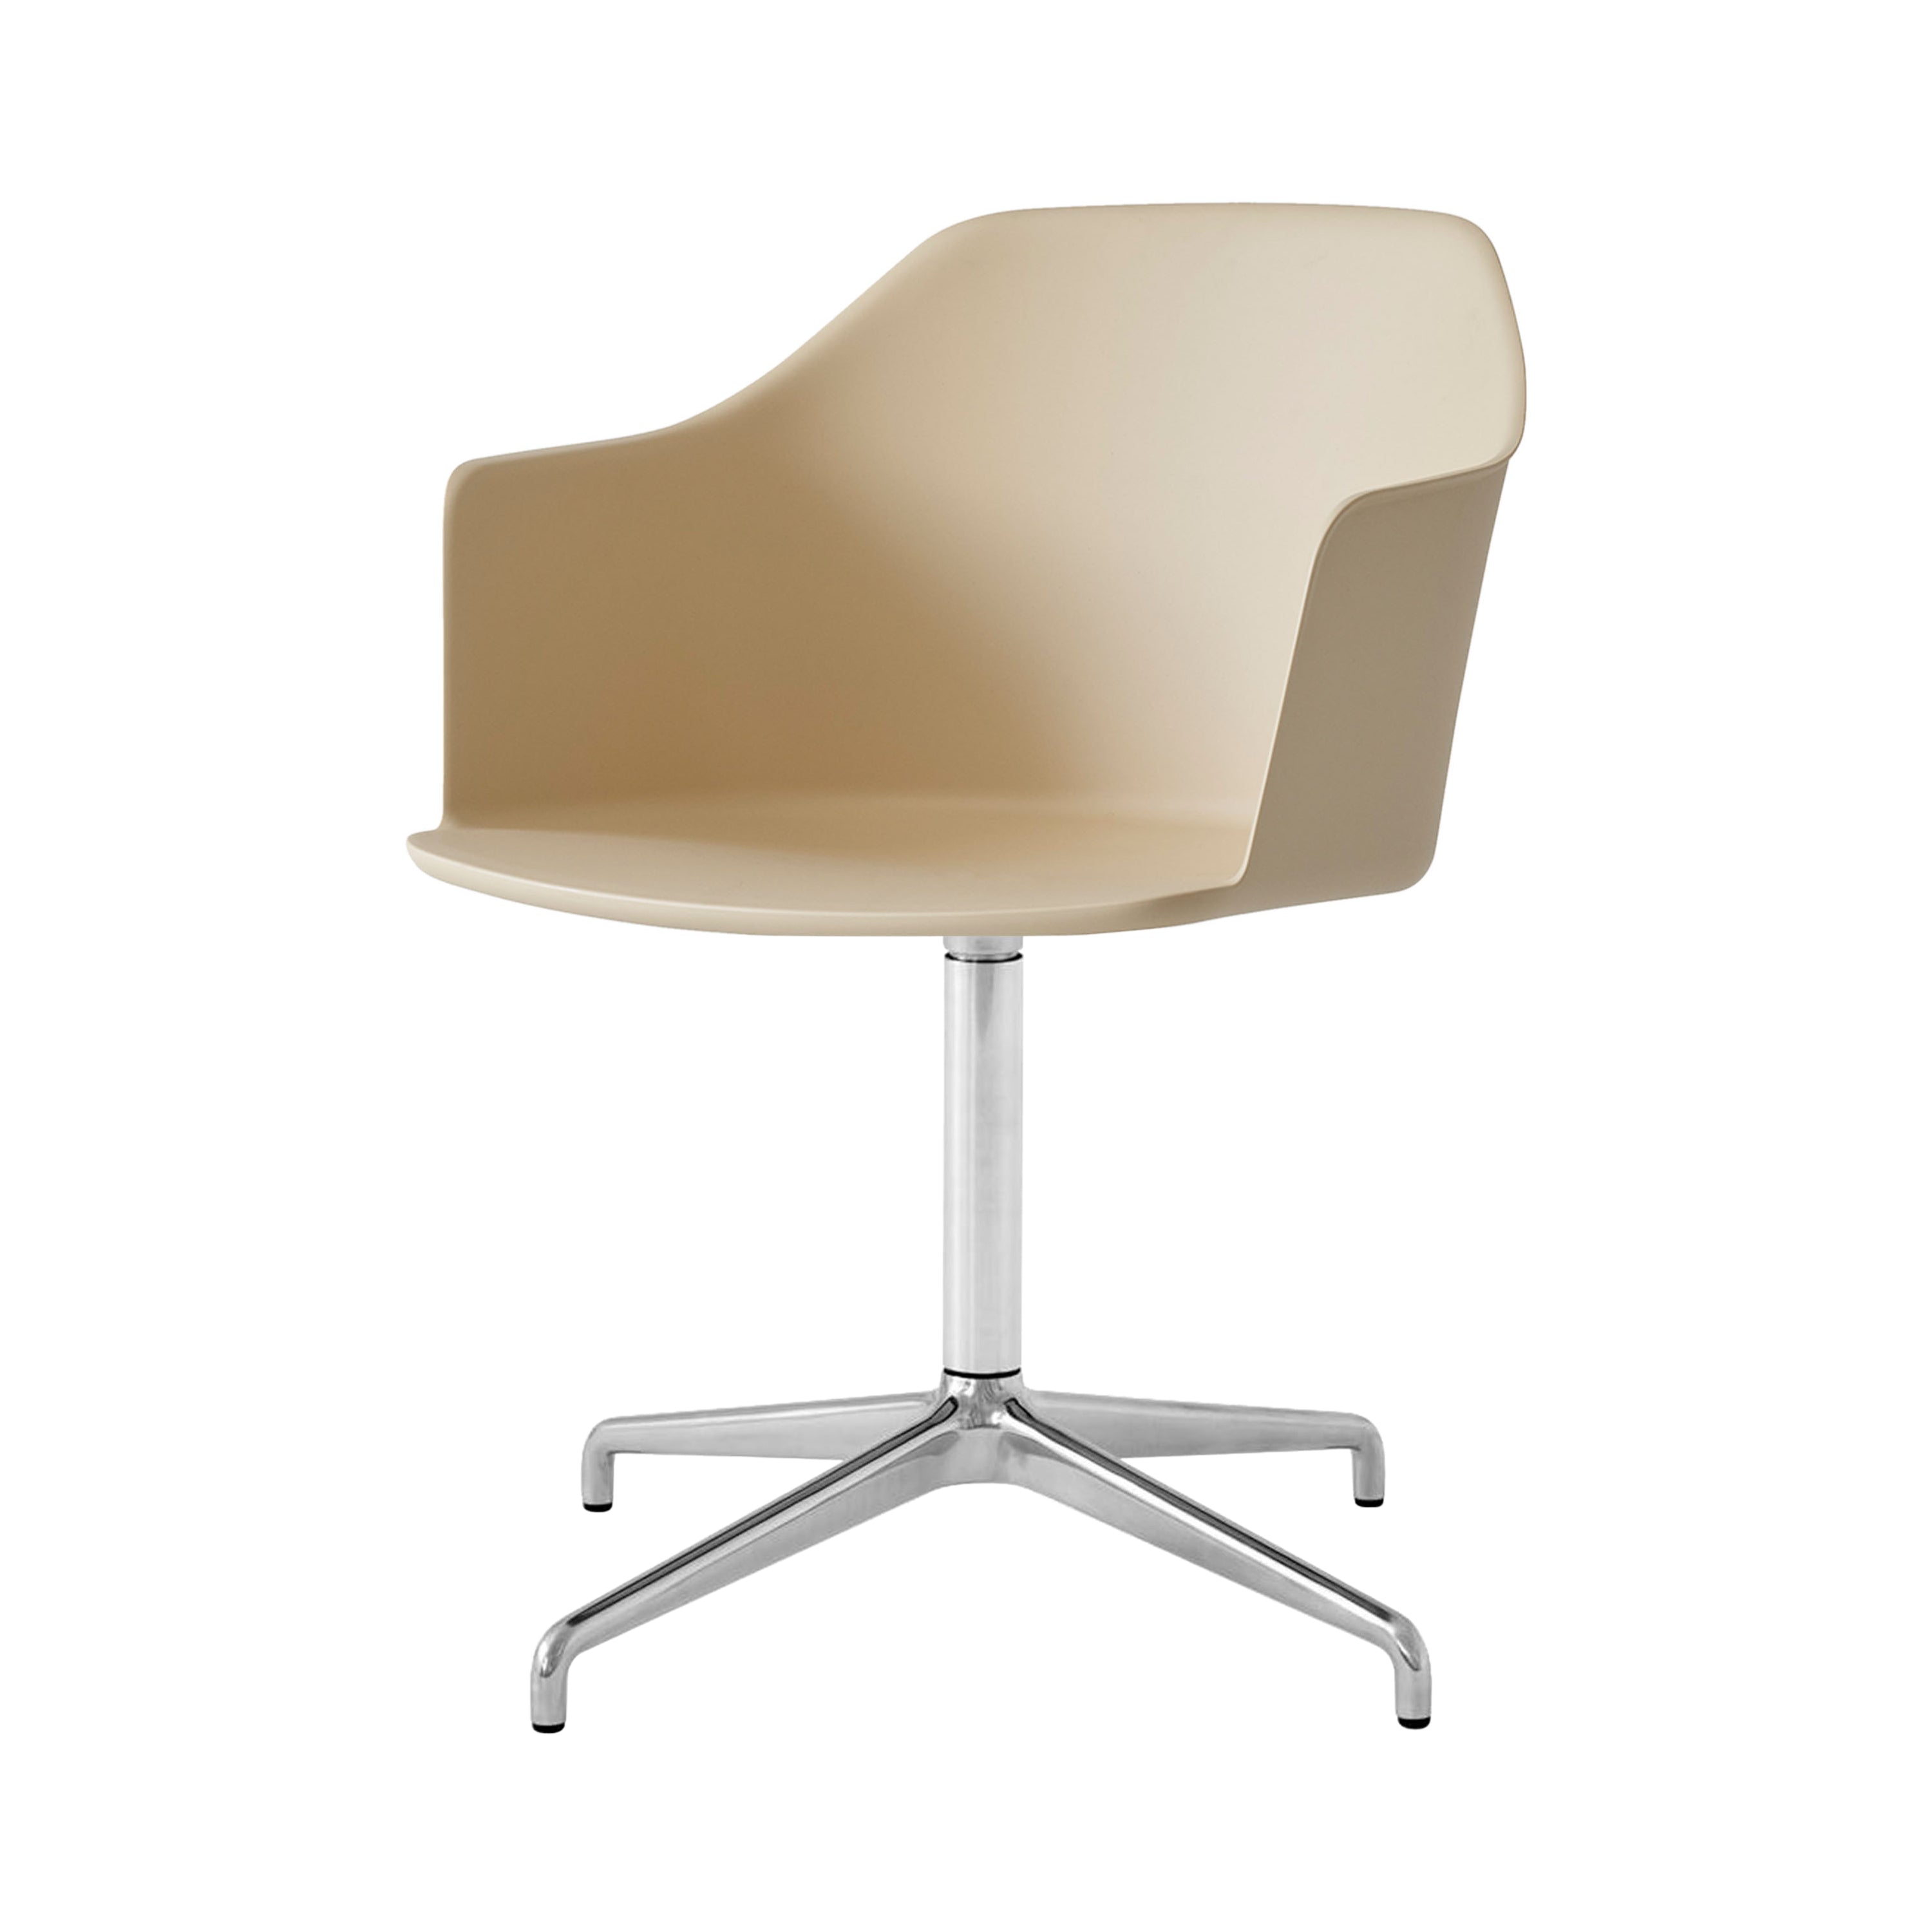 Rely Chair HW38: Beige Sand + Polished Aluminum